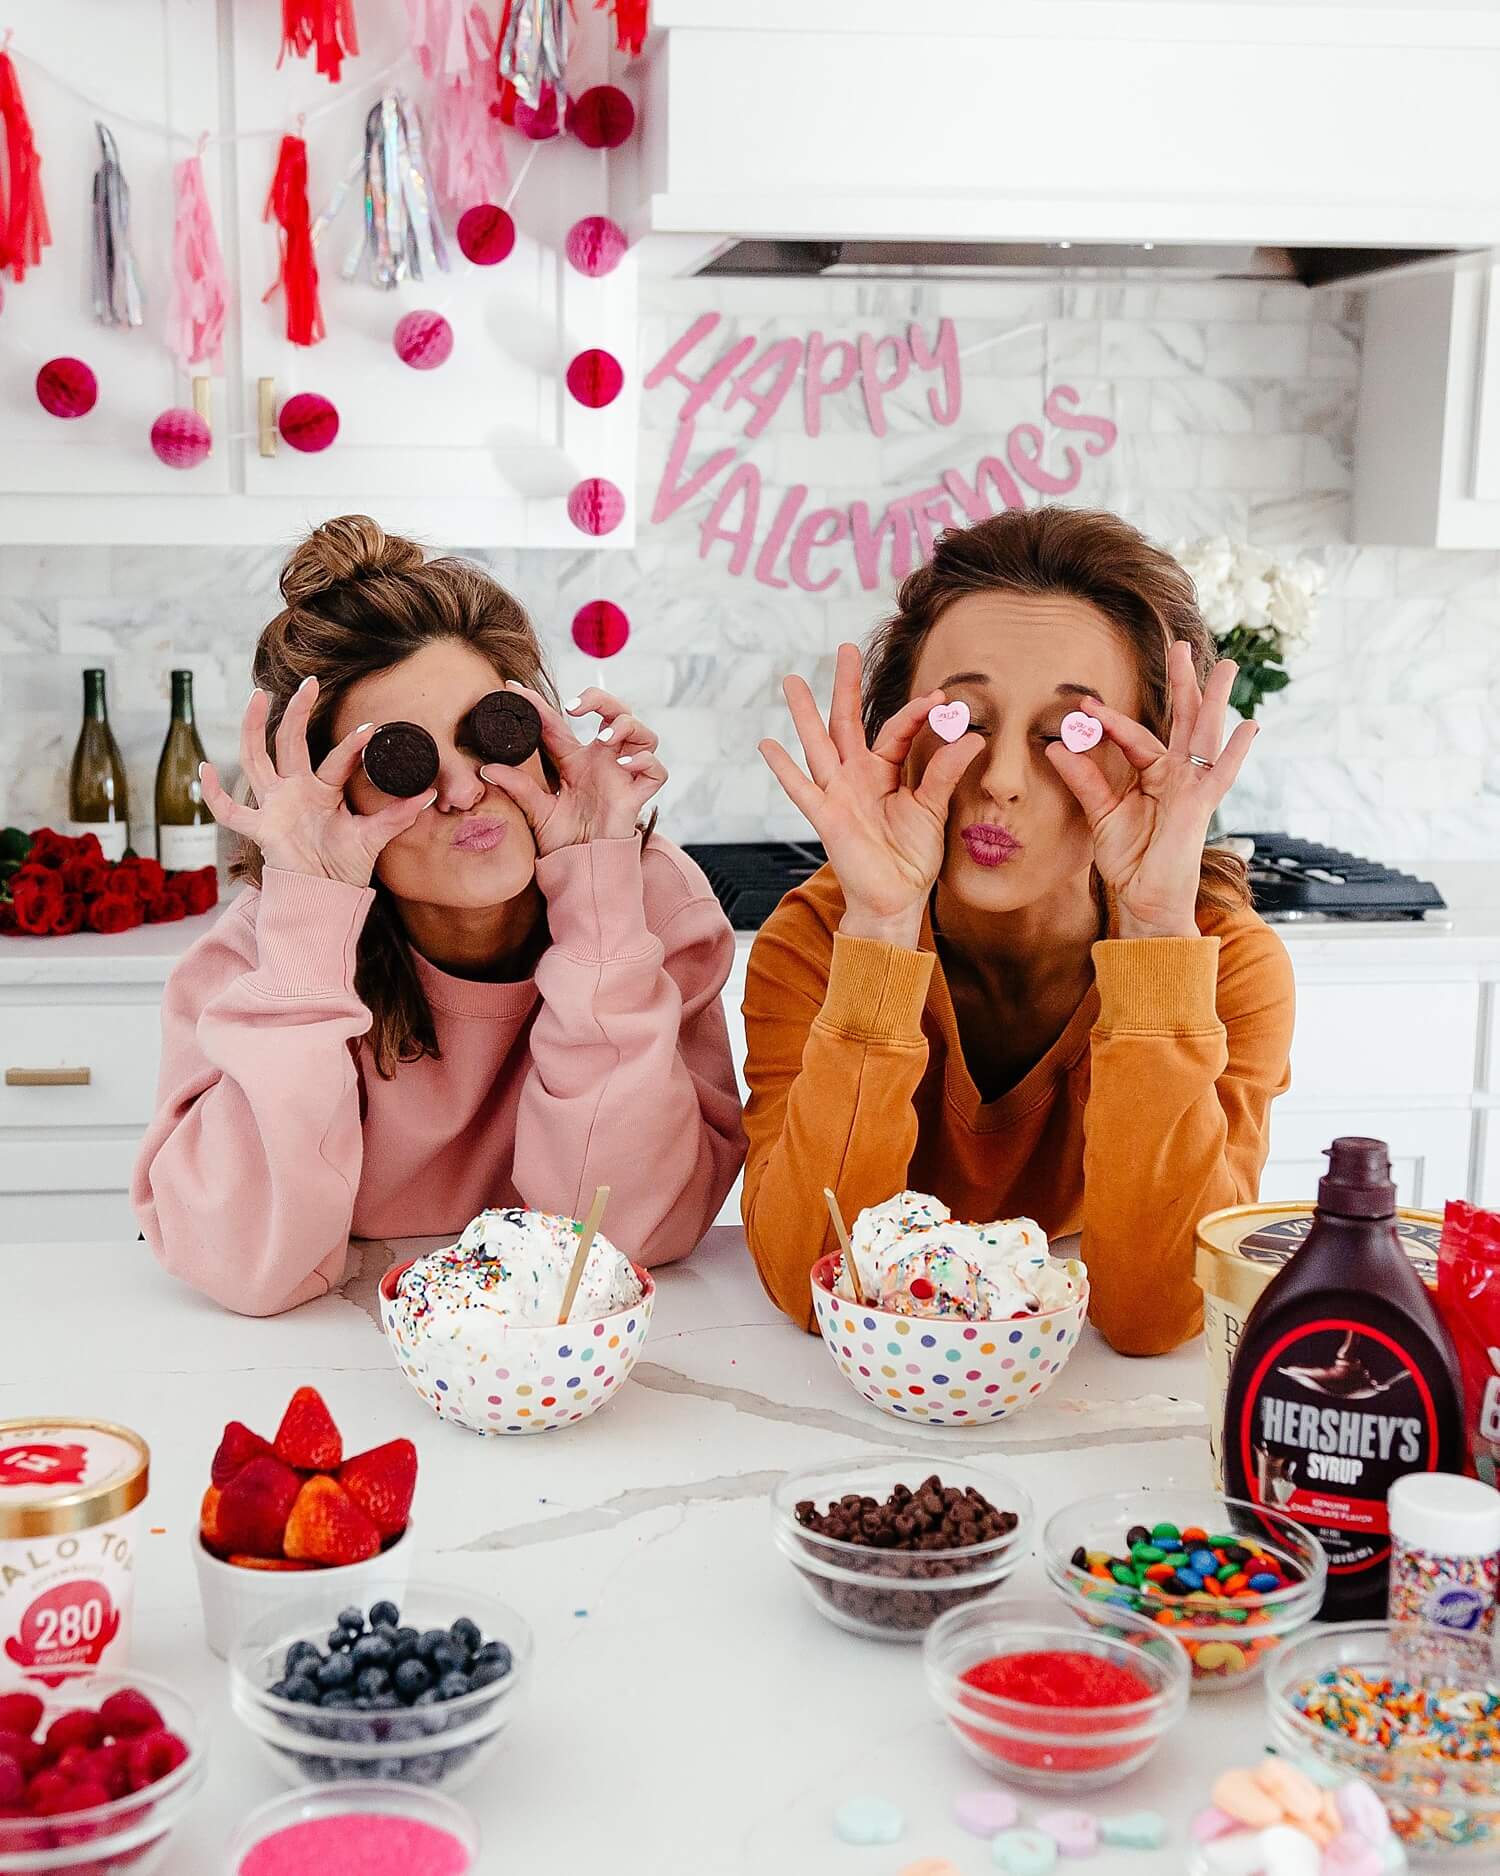 Galentines day party ideas pink and red best friends ice cream 2